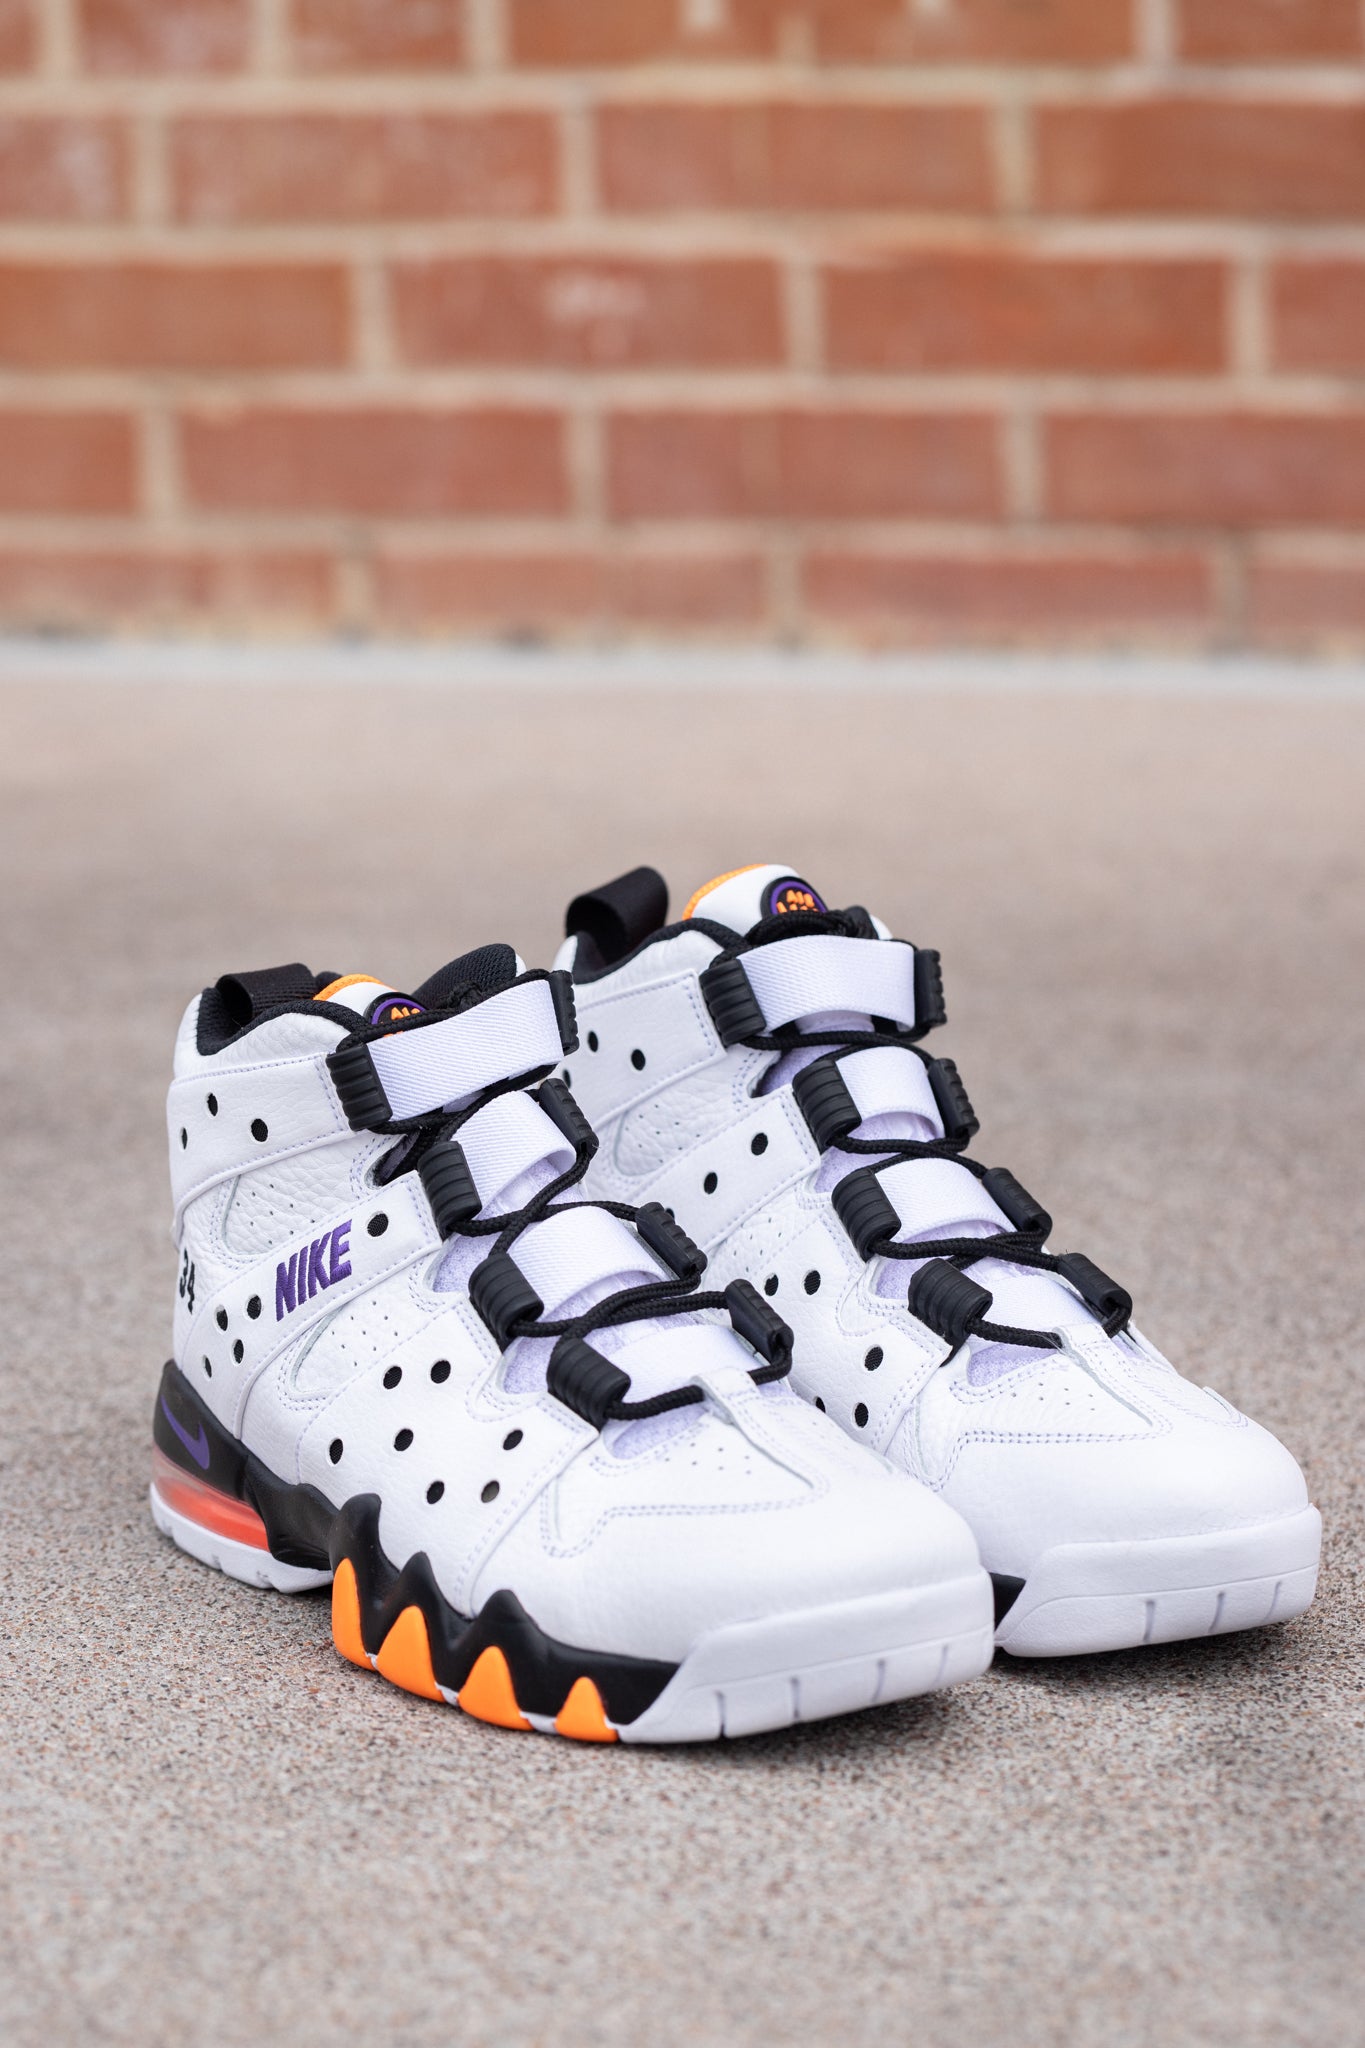 Nike Air Max CB 94 'Suns' Release | Manor PHX – Manor.